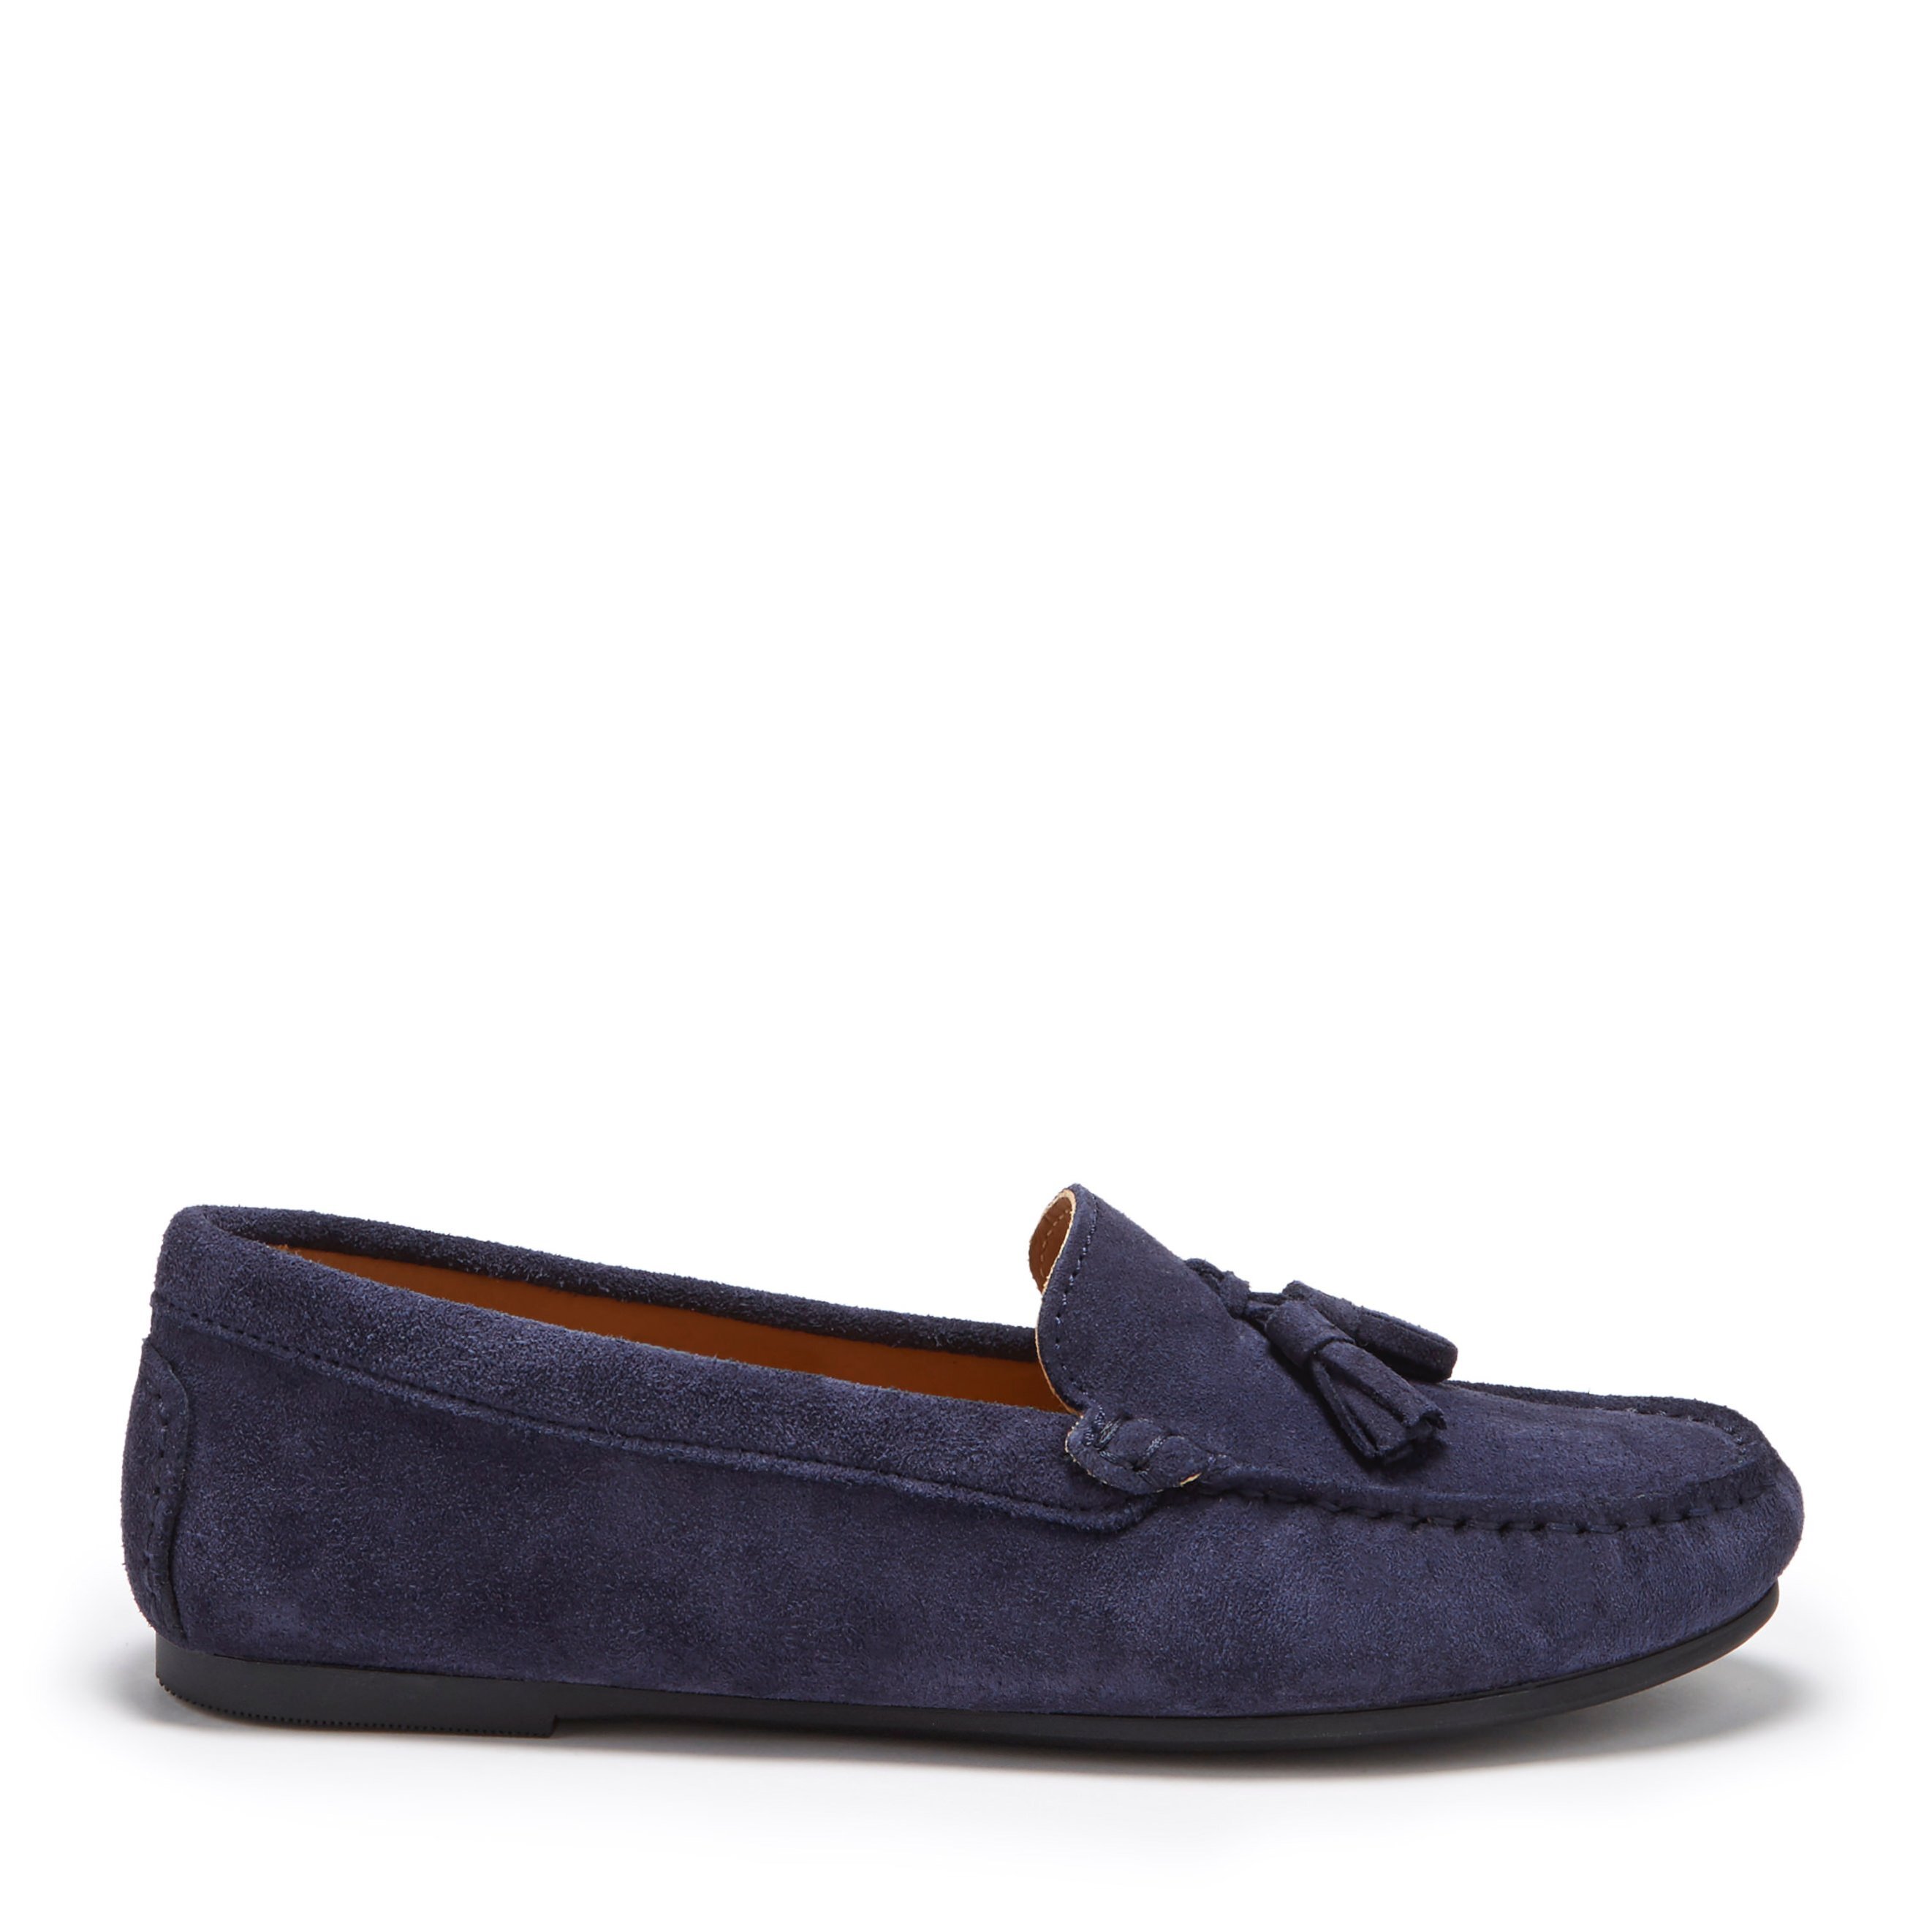 suede moccasins womens